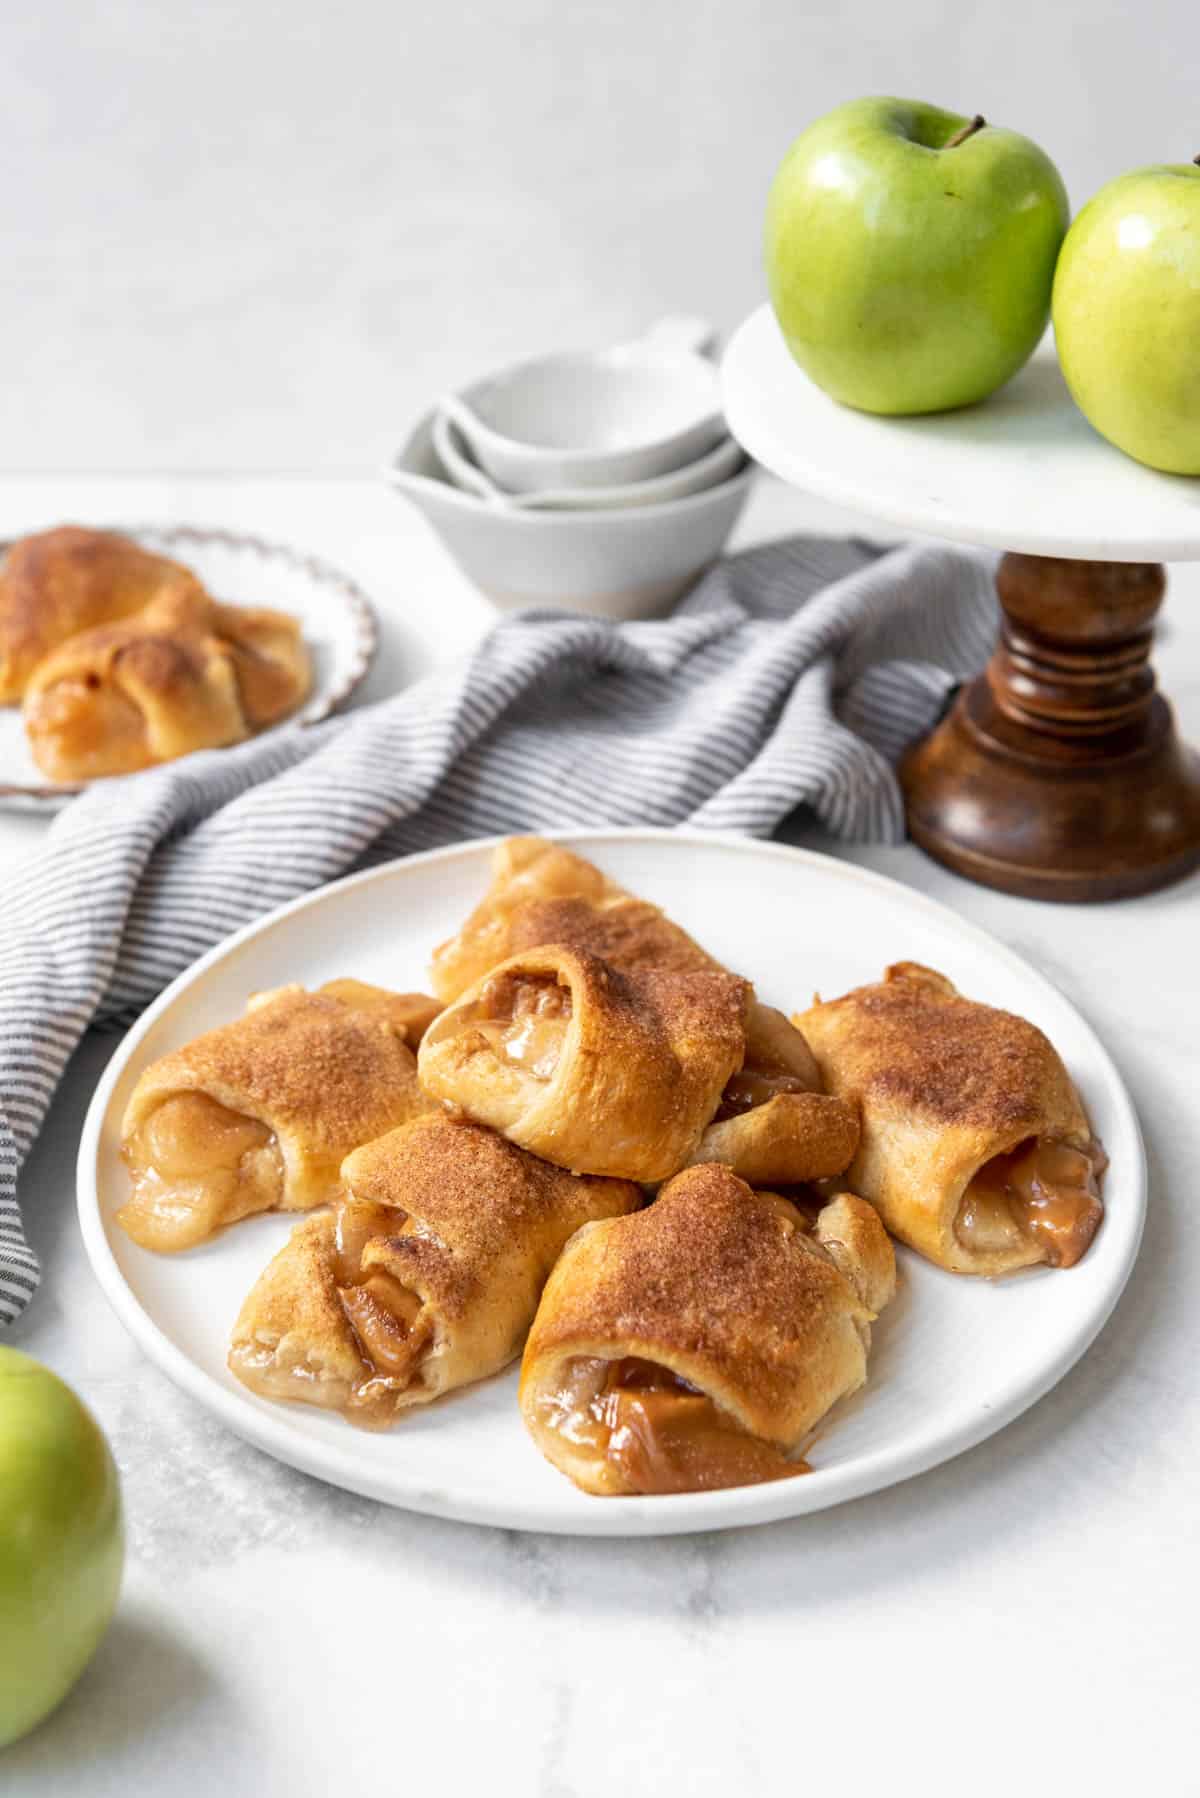 A plate of caramel apple pie crescent rolls in front of a cake stand with Granny Smith apples.